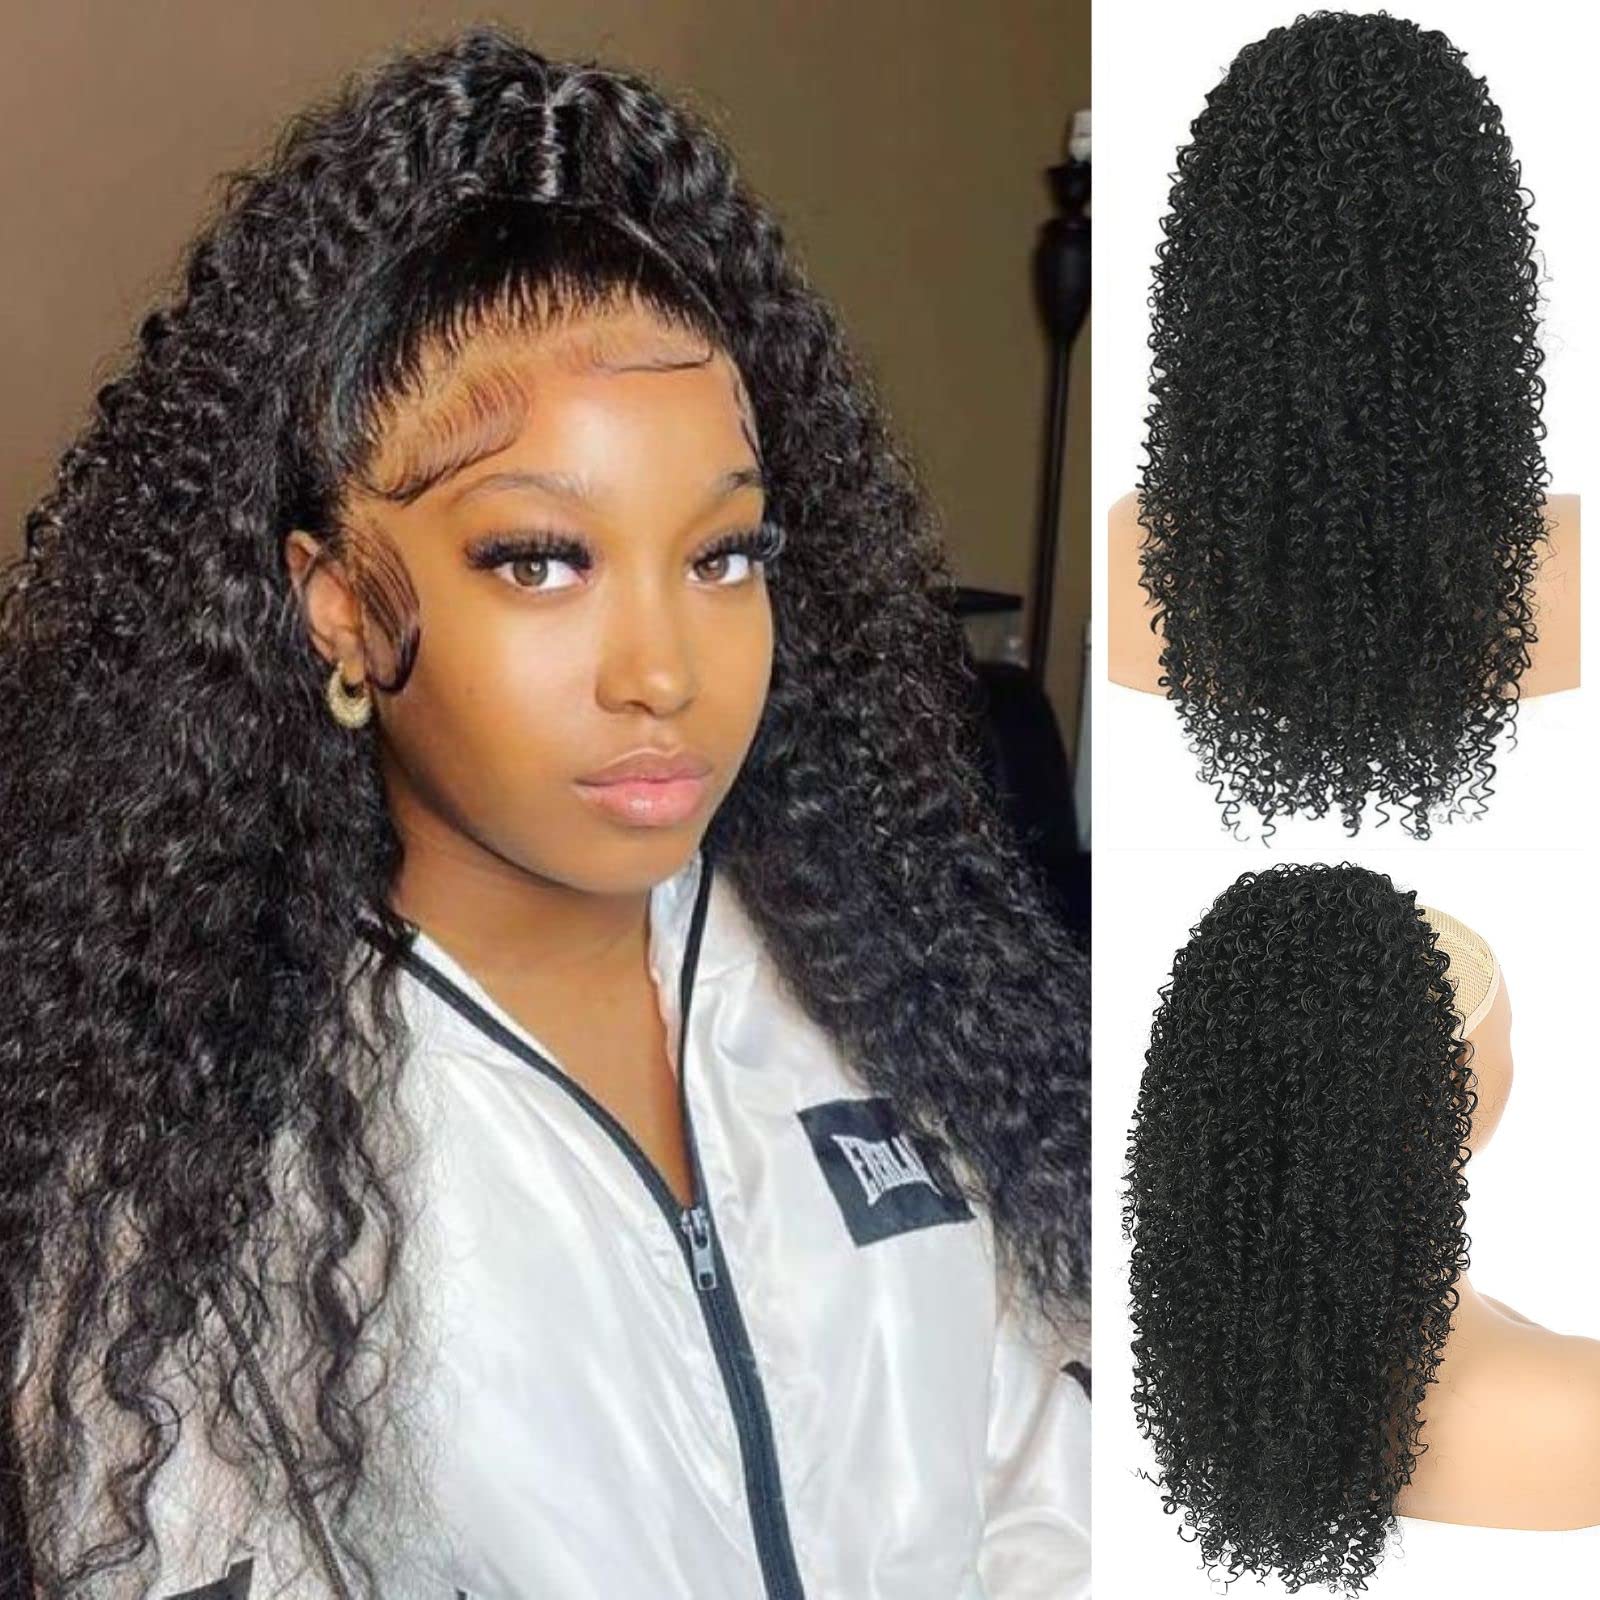 3 Kinky Hairstyles for Natural Hair